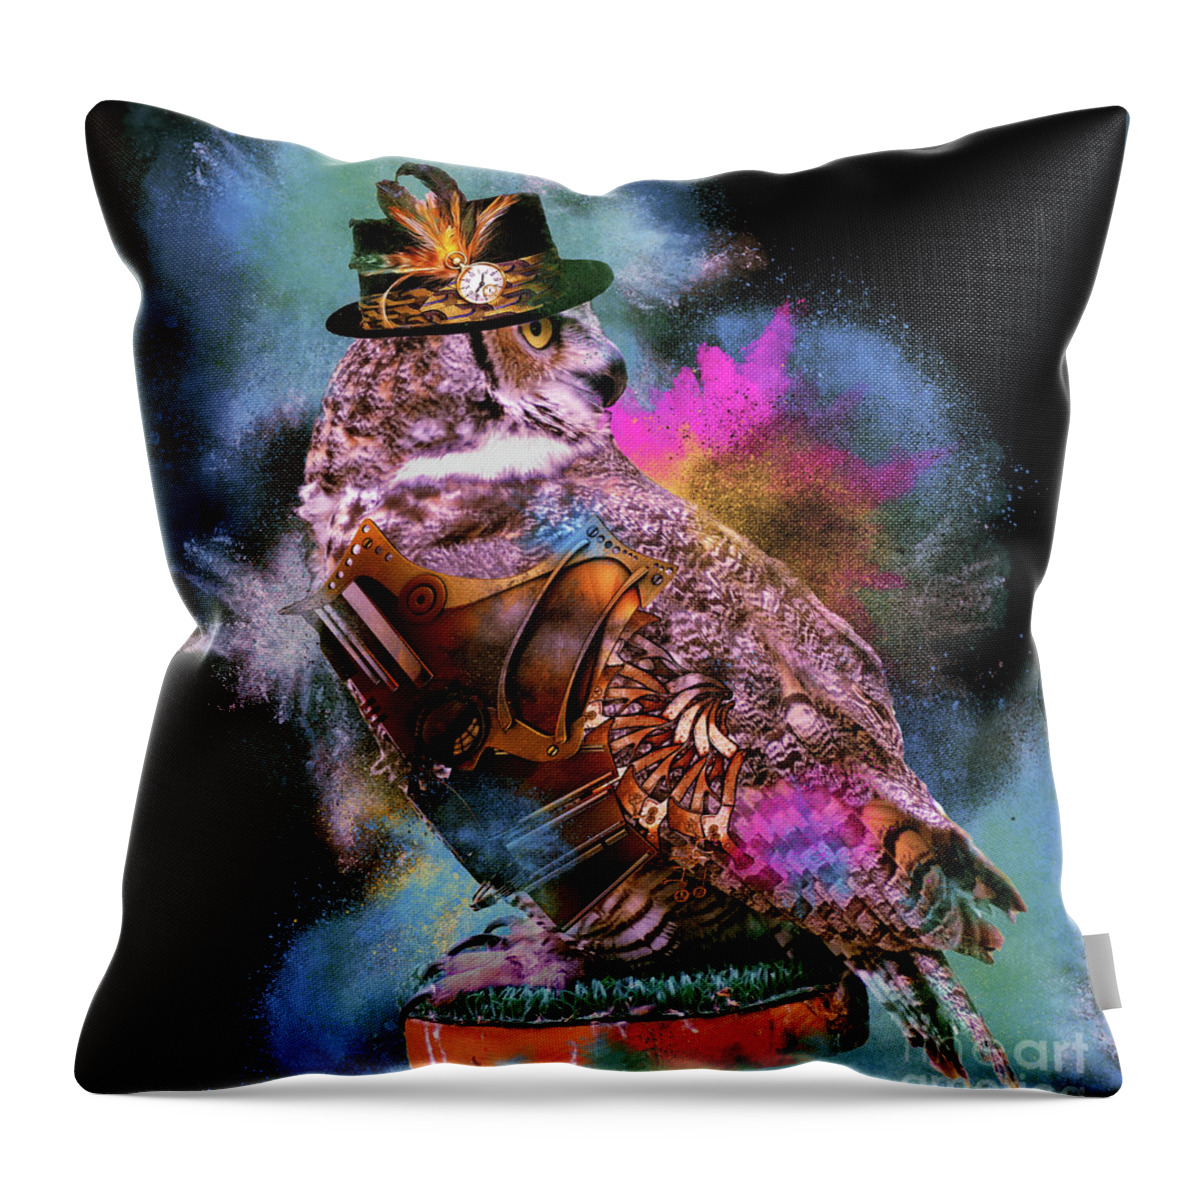 Surreal Throw Pillow featuring the digital art The Greatest Showman by Kathy Kelly